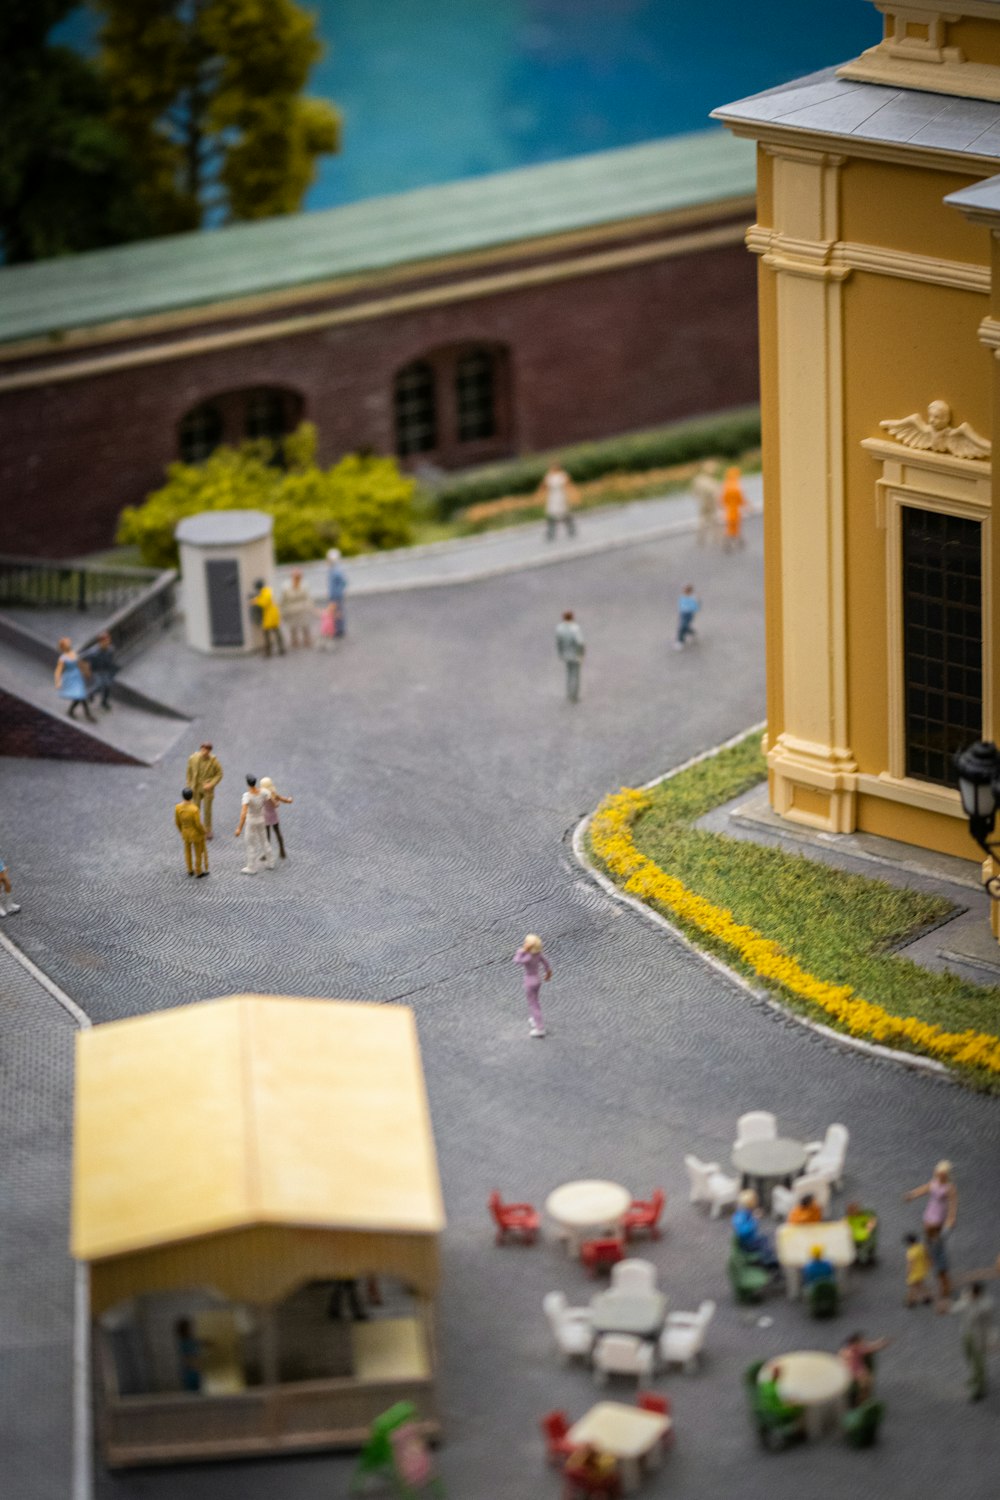 a miniature model of a town with people and cars